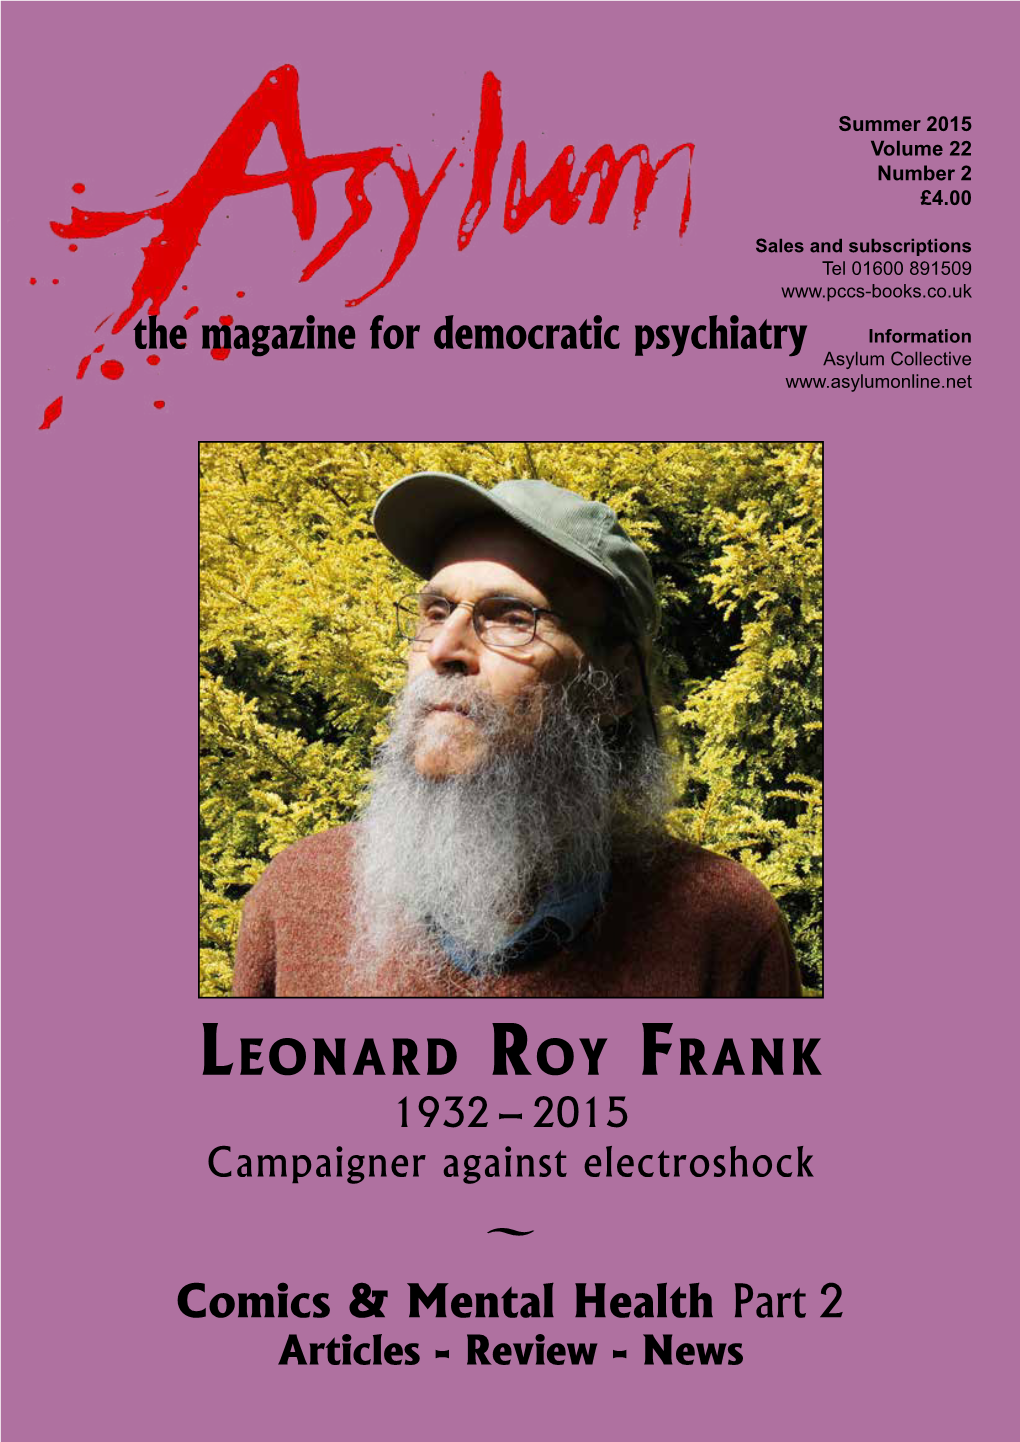 Leonard Roy Frank 1932 – 2015 Campaigner Against Electroshock ~ Comics & Mental Health Part 2 Articles - Review - News I Wondered If There Is Something Wrong with Me